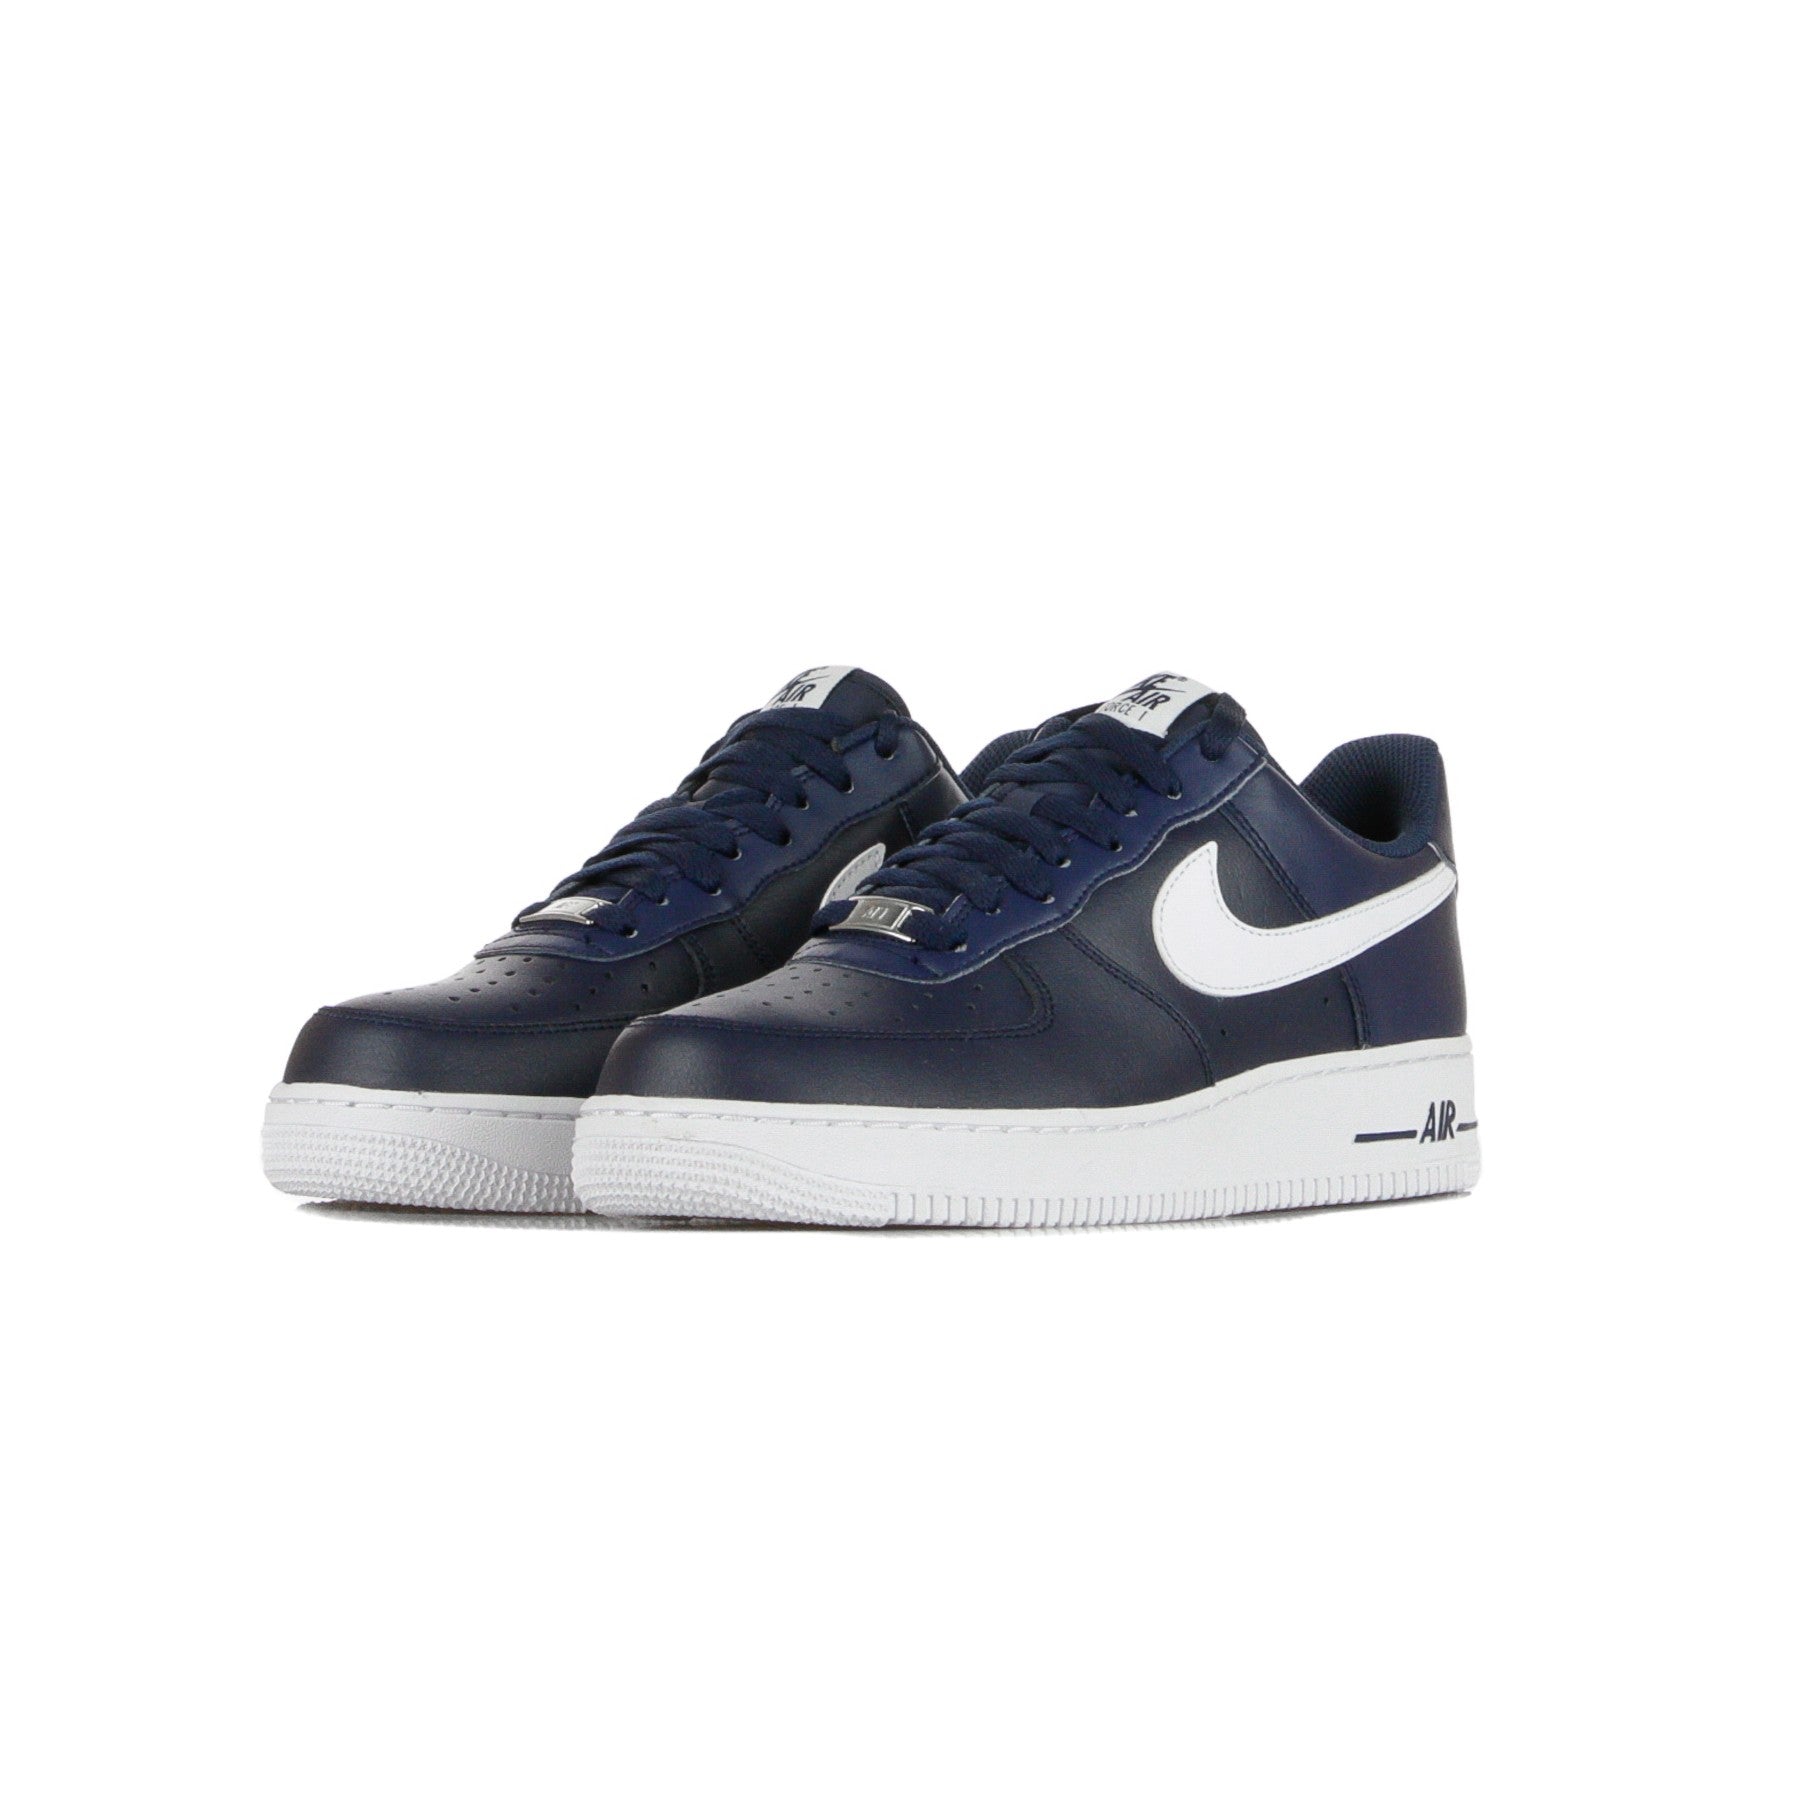 Air Force 1 '07 Midnight Navy/white Men's Low Shoe